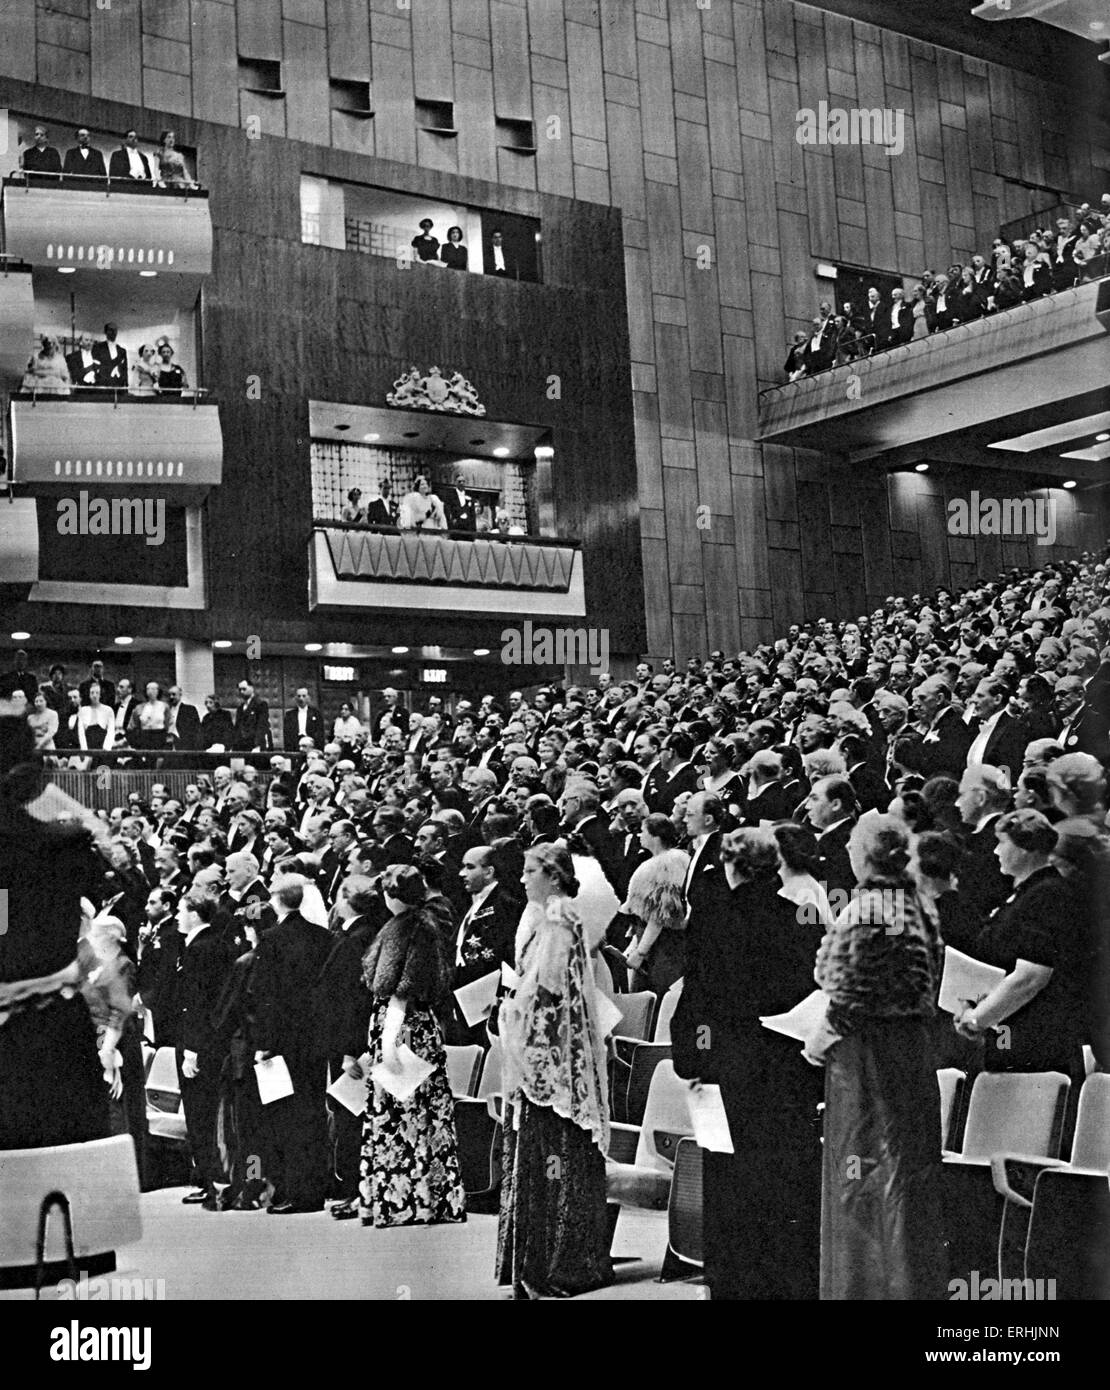 Opening of the Royal Festival Hall, London.  Photograph from The Illustrated London News, May 12, 1951. Festival of Britain Stock Photo